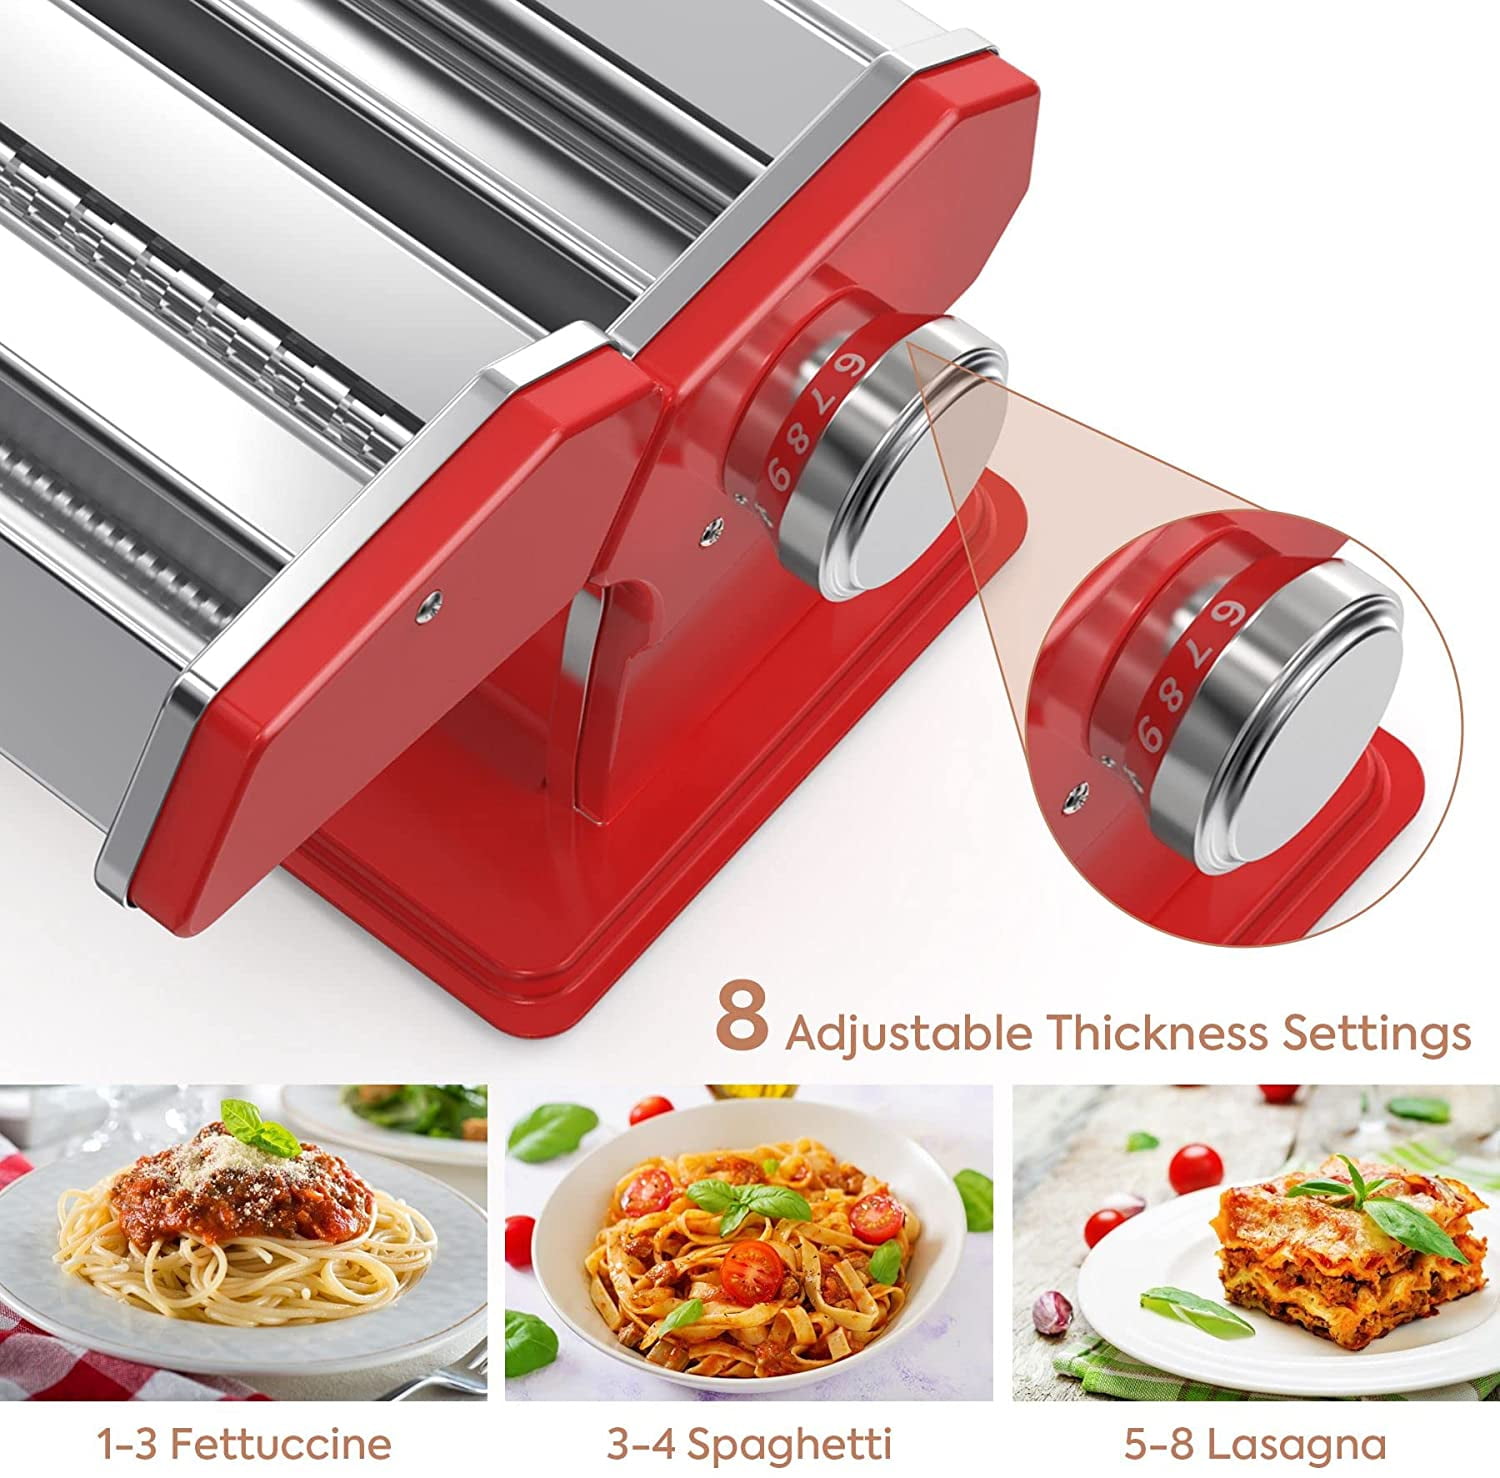 Oukaning Commercial Pasta Maker Nonstick Stainless Steel Manual Fresh Noodle  Making Machine Red 